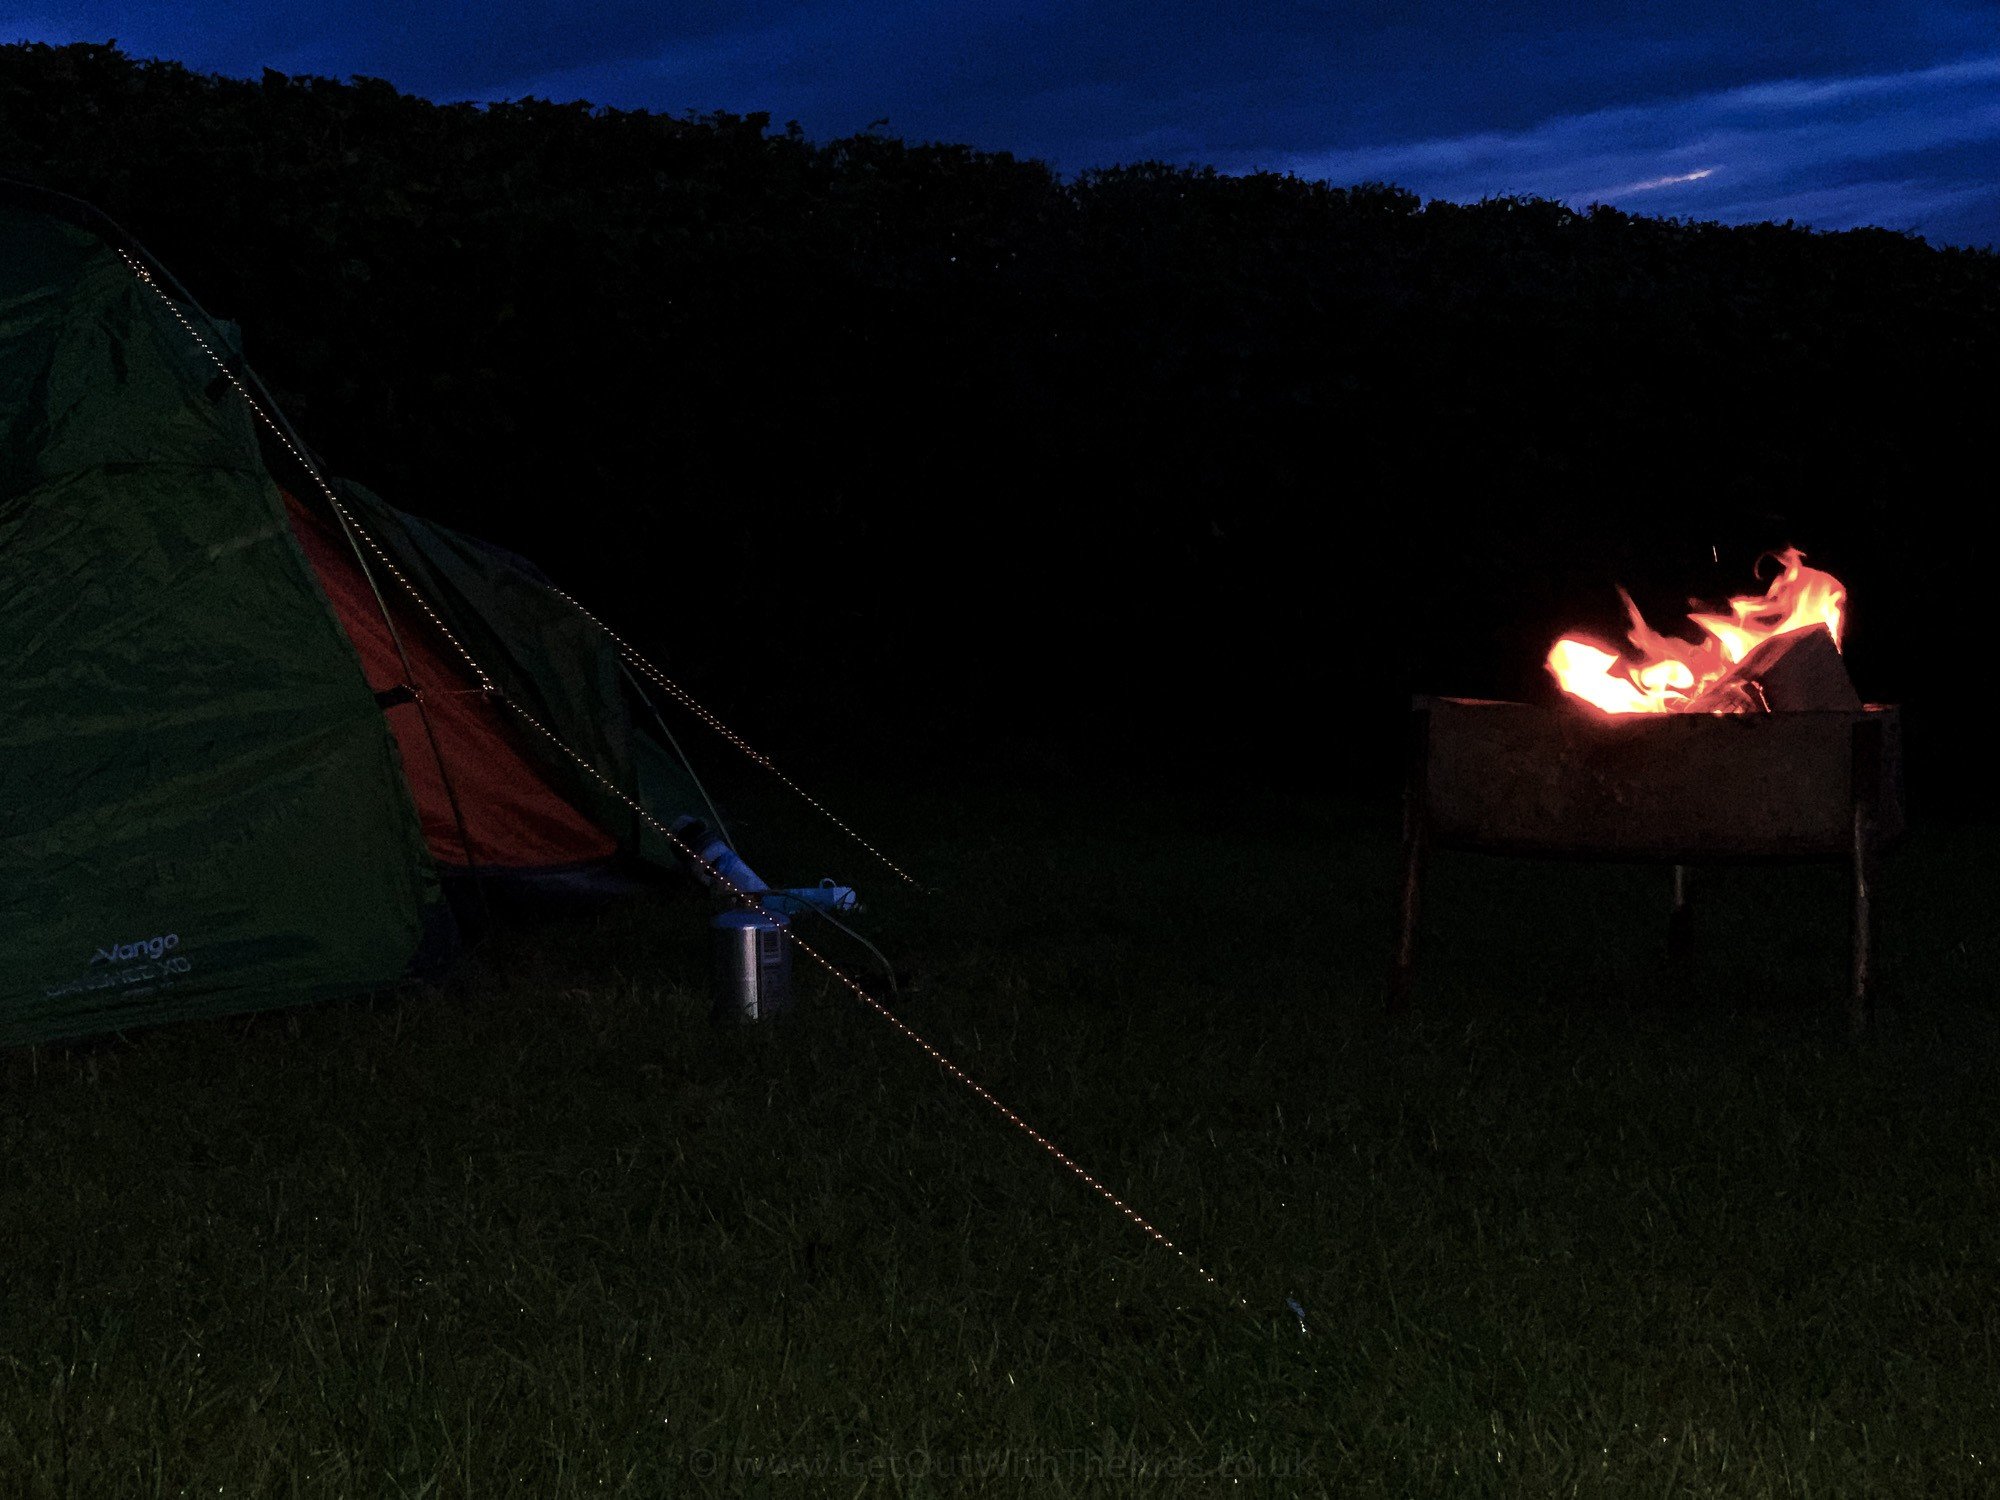 Night at the campsite